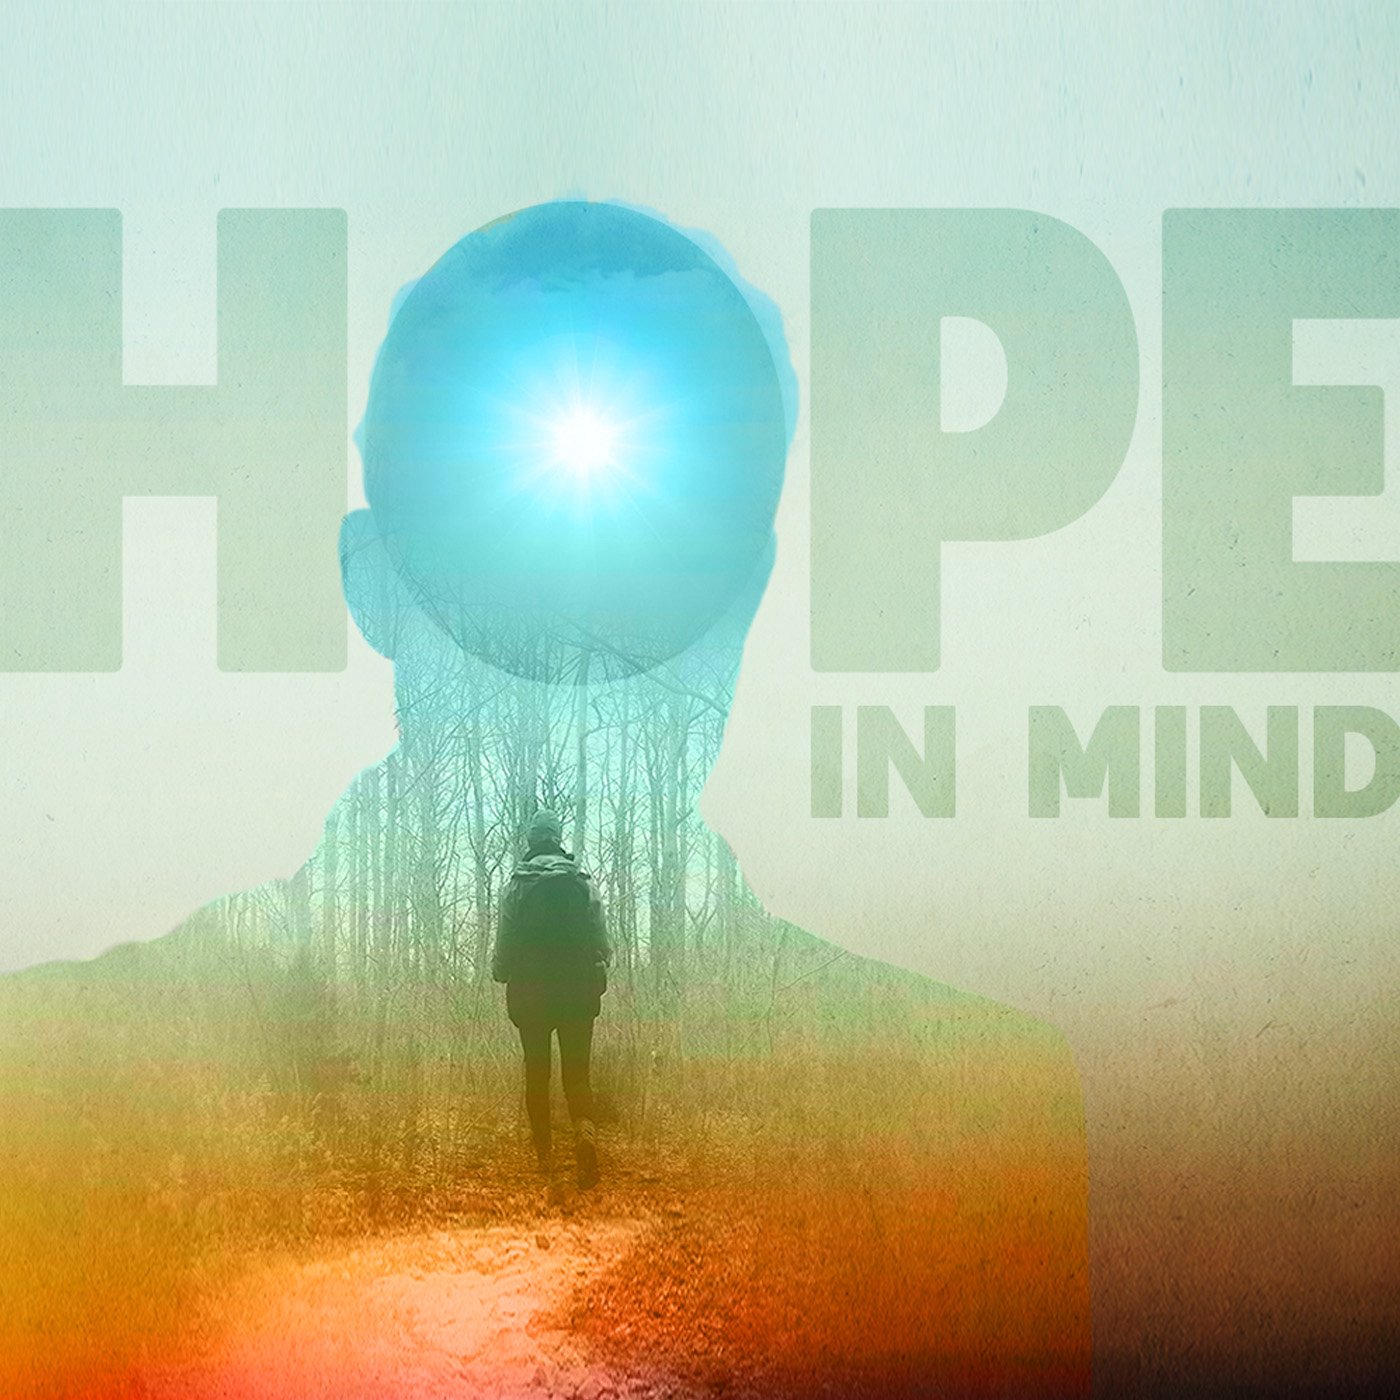 Replacing Anxiety with Hope